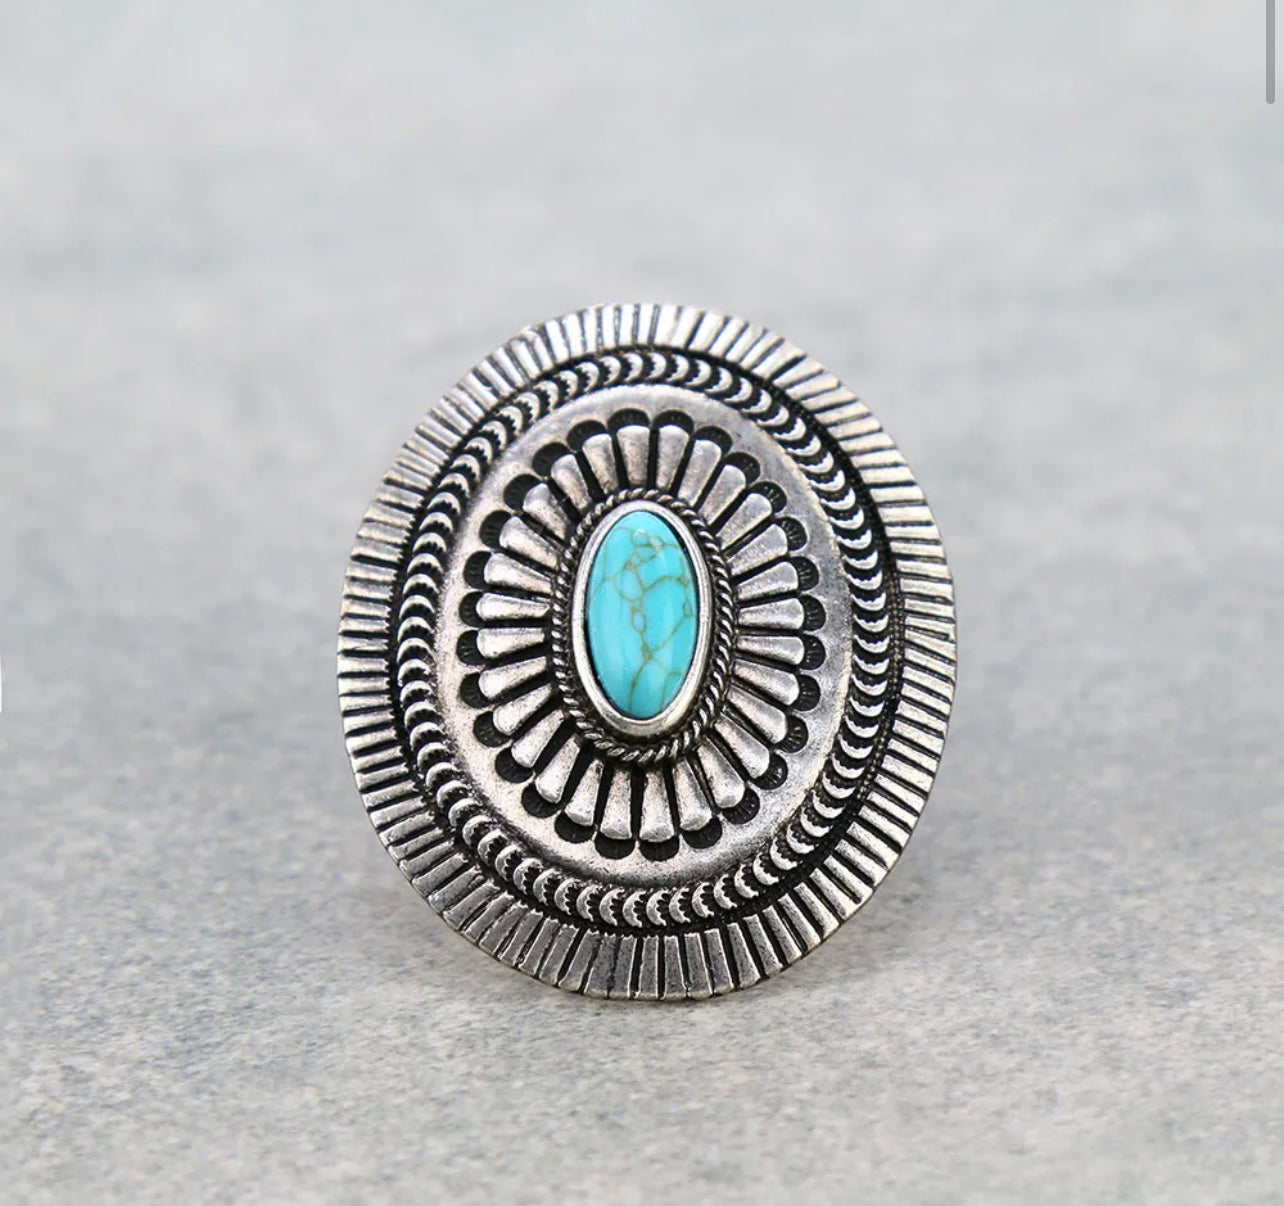 The Cowgirl Concho Ring